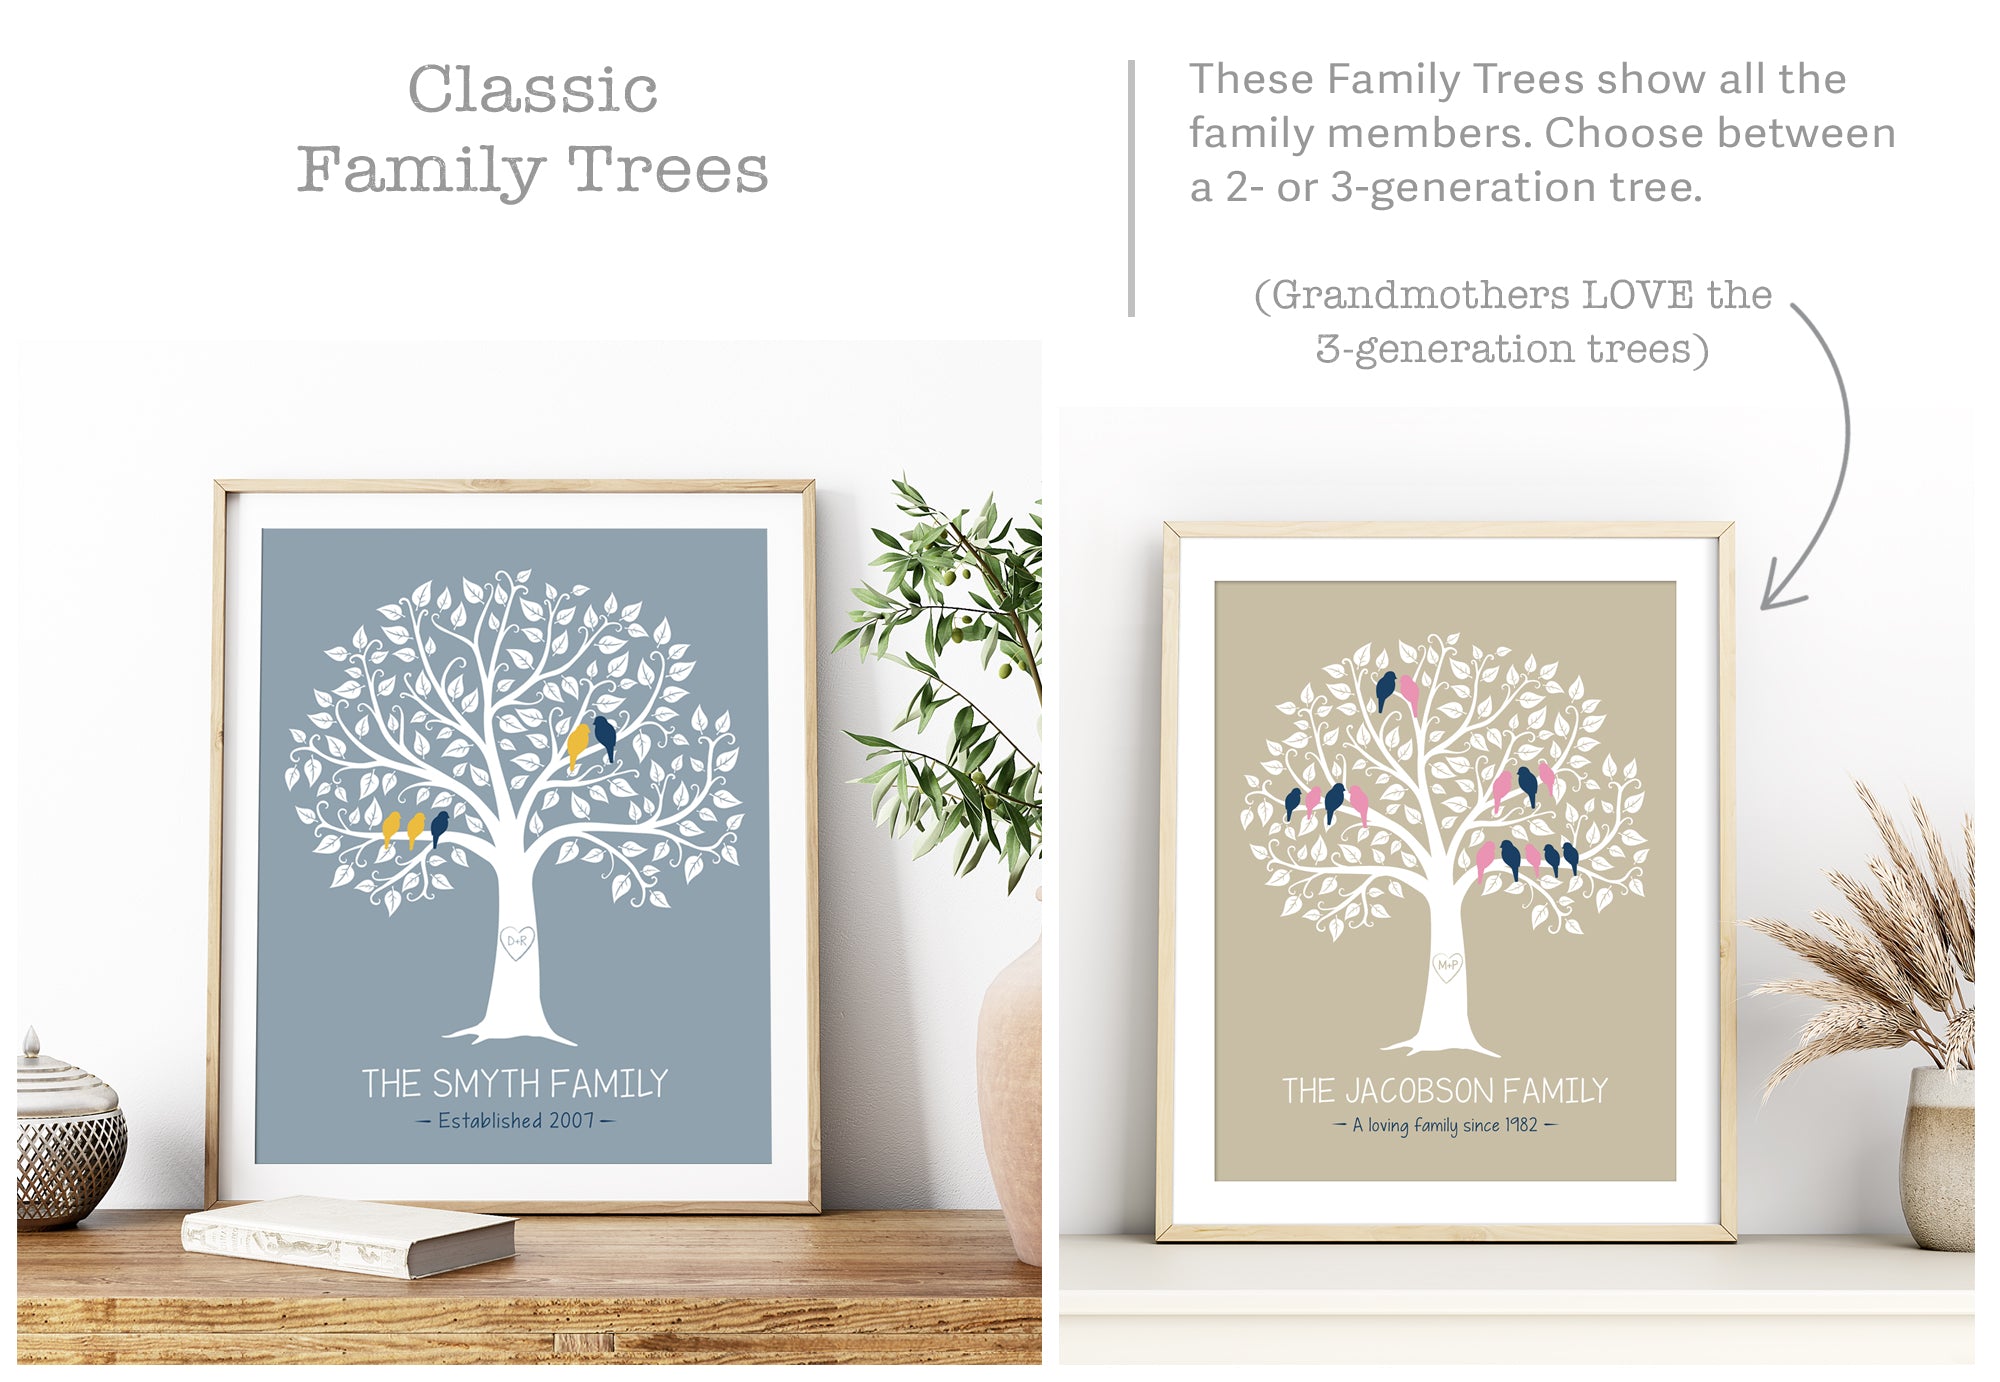 Personalized Family Tree for 2 or 3 generations